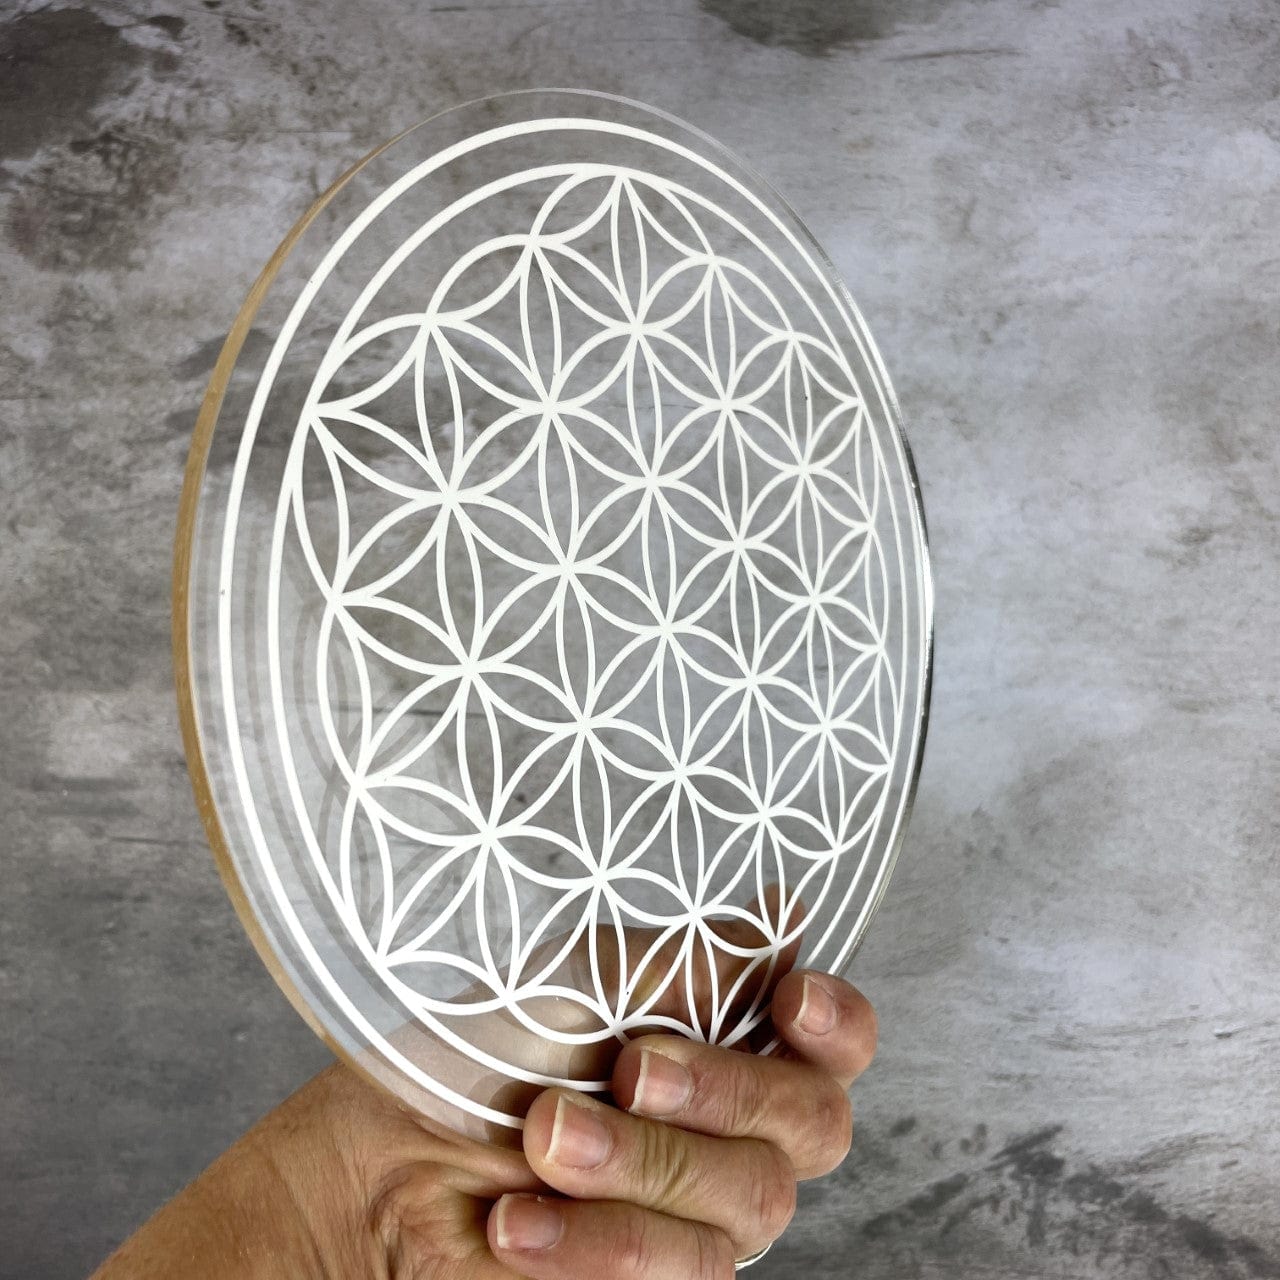 Crystal Grid Flower of Life Acrylic Grid - 2 sided - White side in a hand